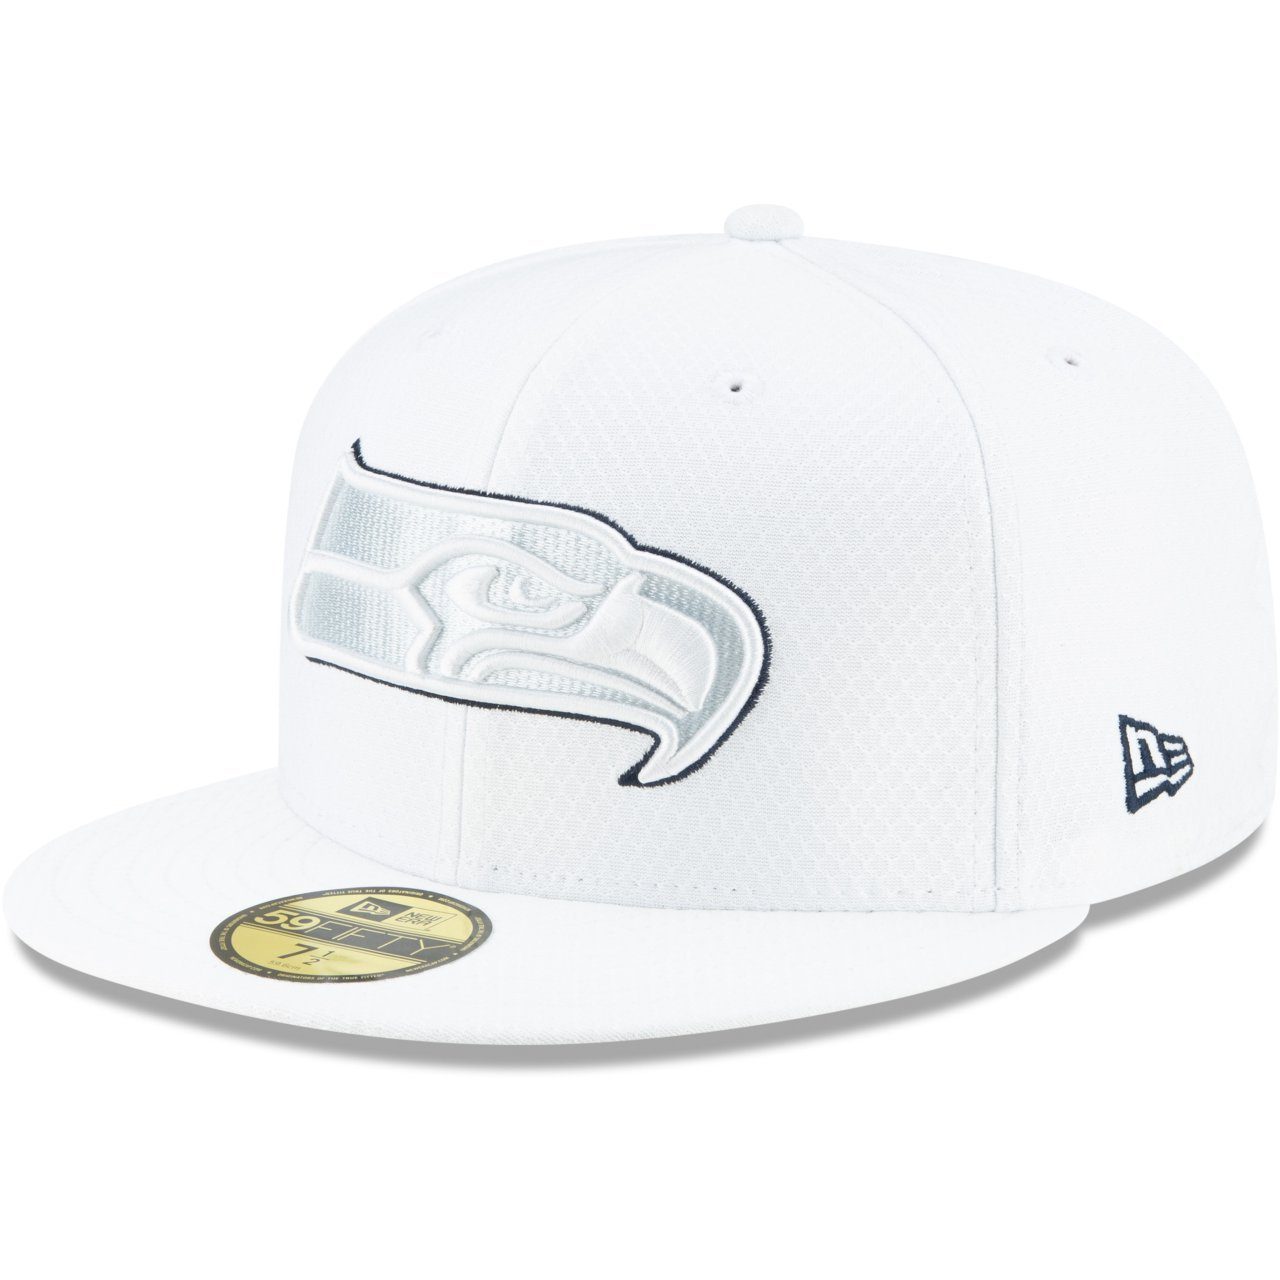 New Era Fitted Cap 59Fifty Seahawks PLATINUM NFL Sideline Seattle